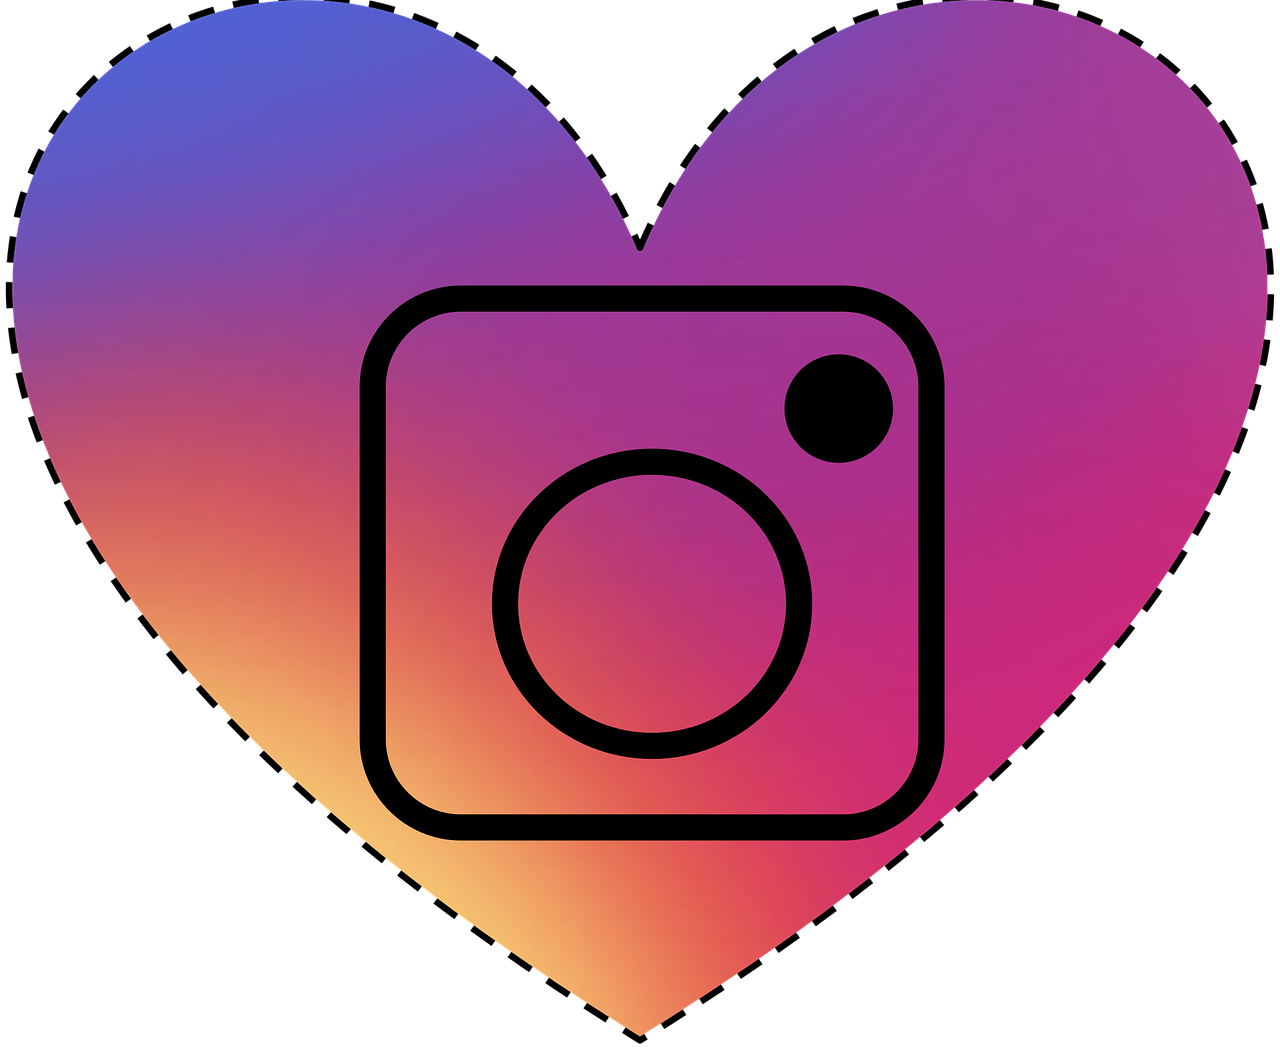 Instagram,icon,heart,free vector graphics,free pictures - free image from needpix.com